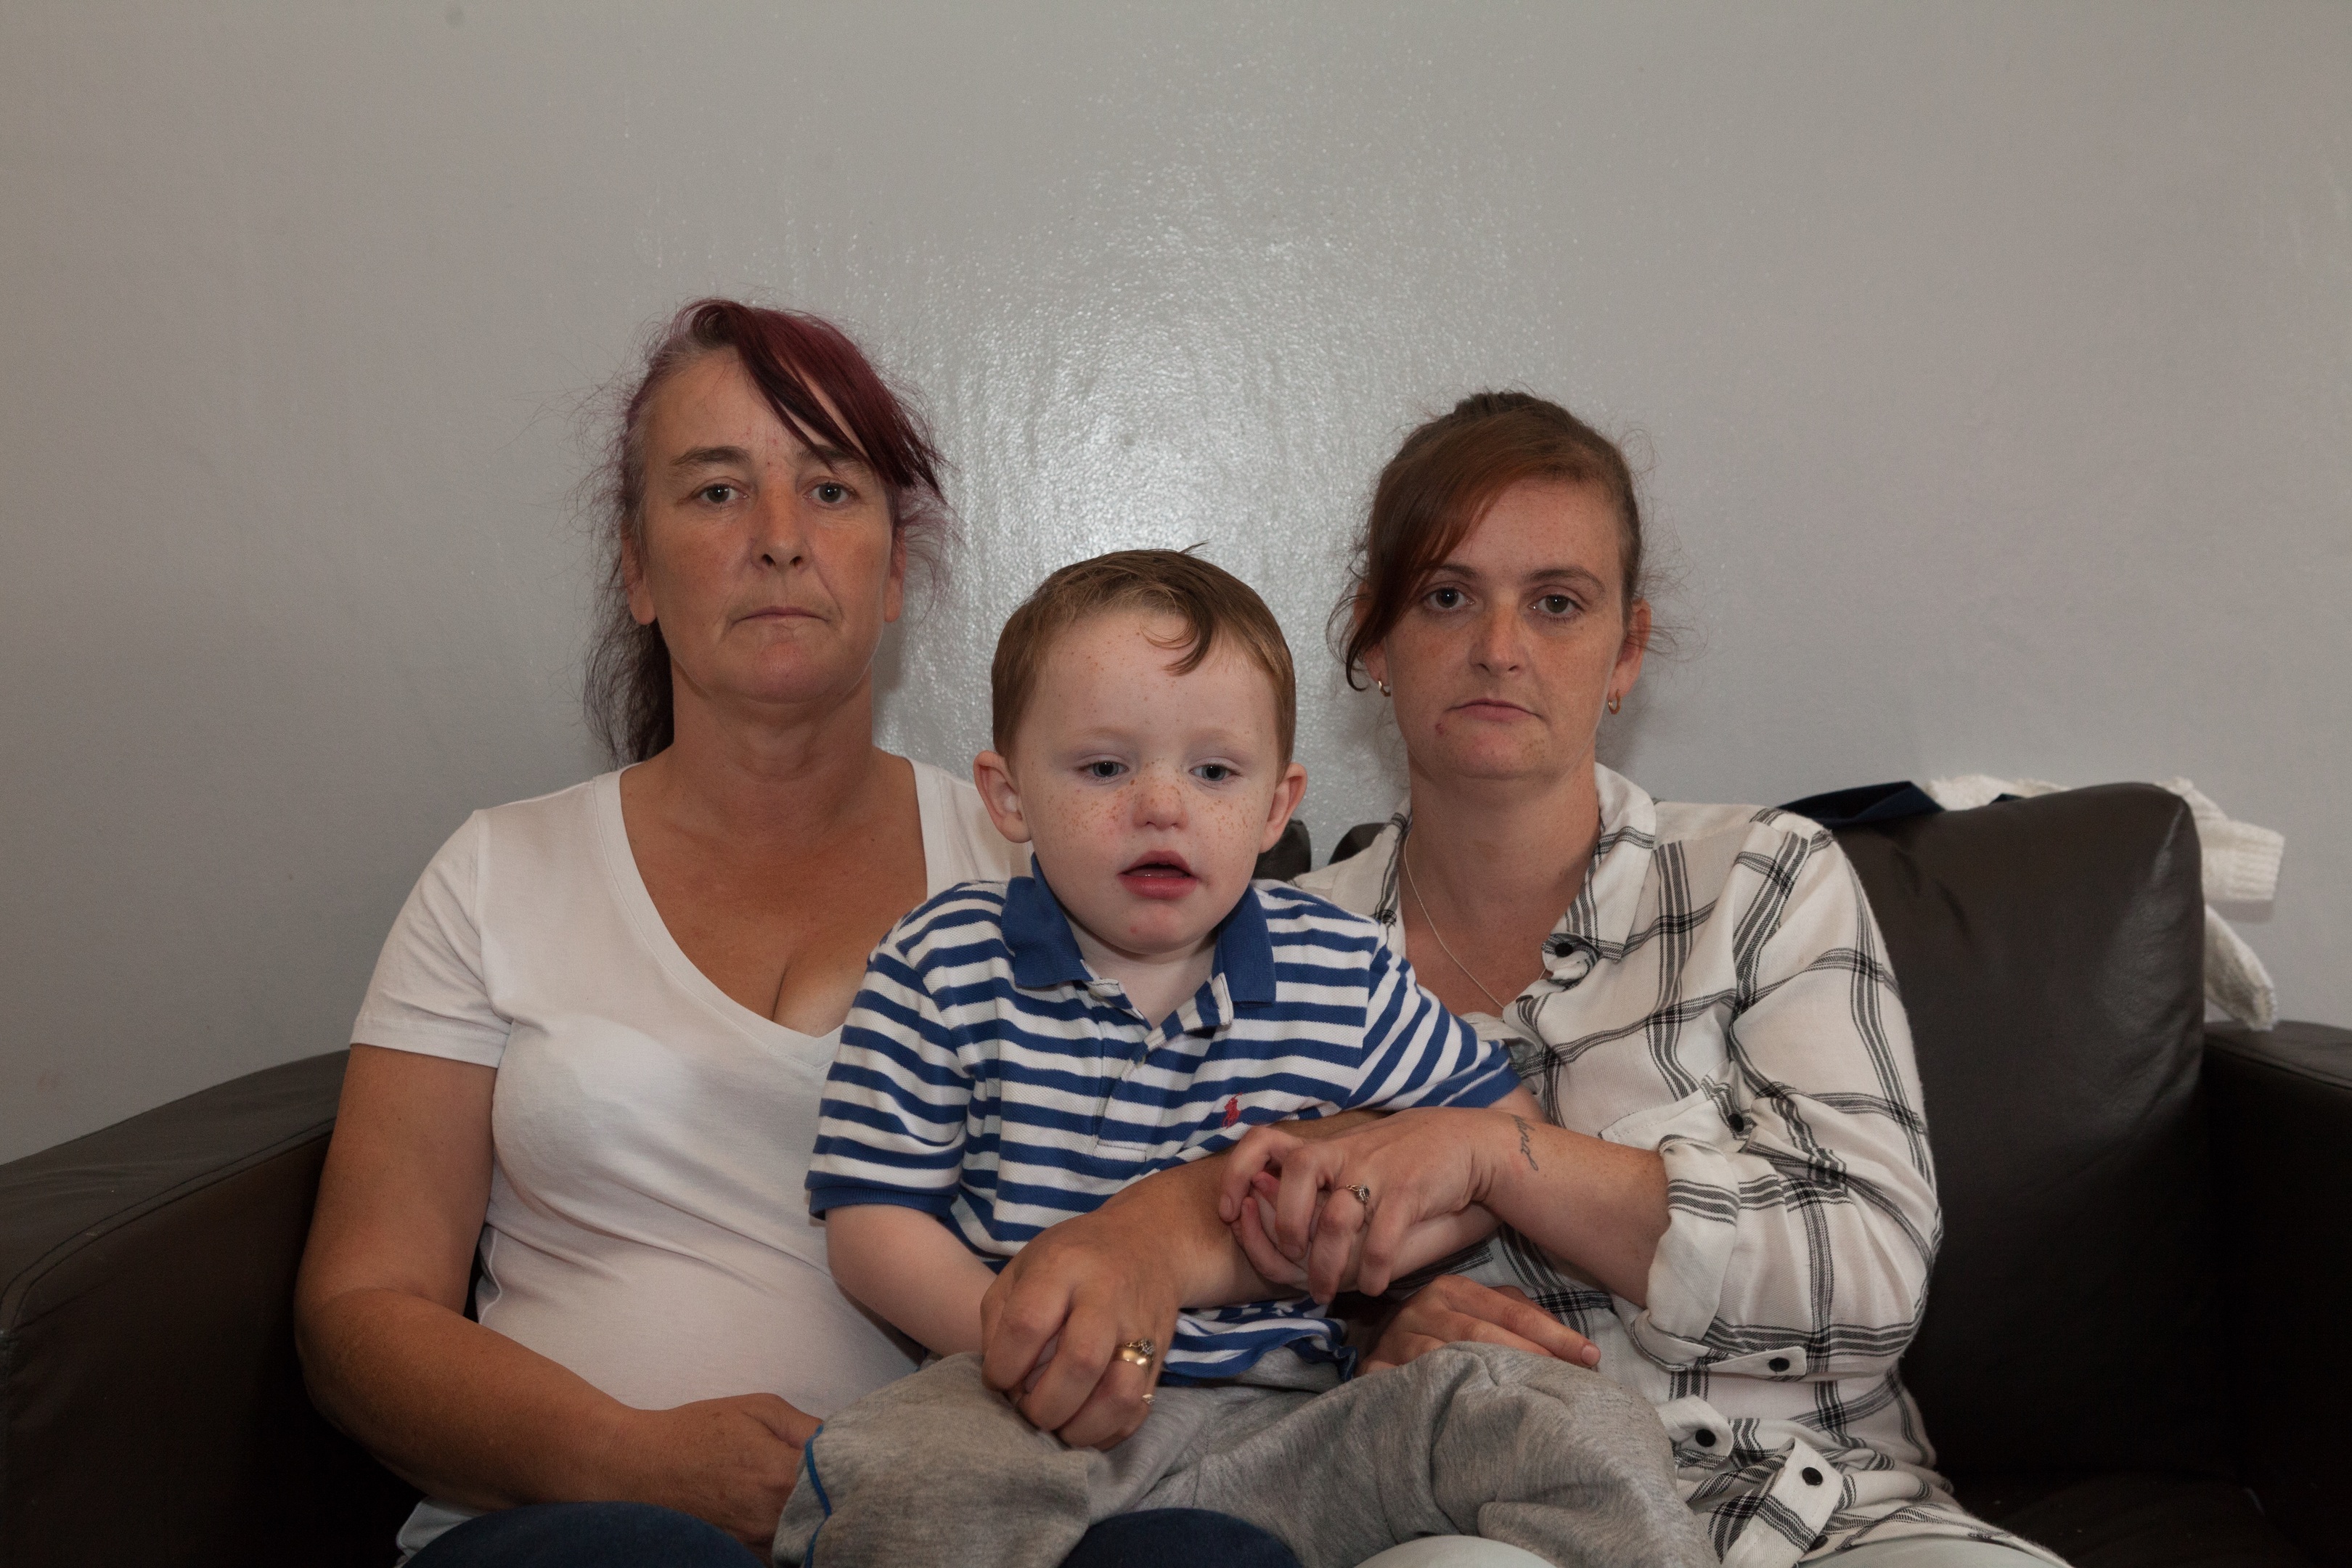 Michelle Johnstone, her mother Catherine, and son Leeland who was left unattended on a bus.